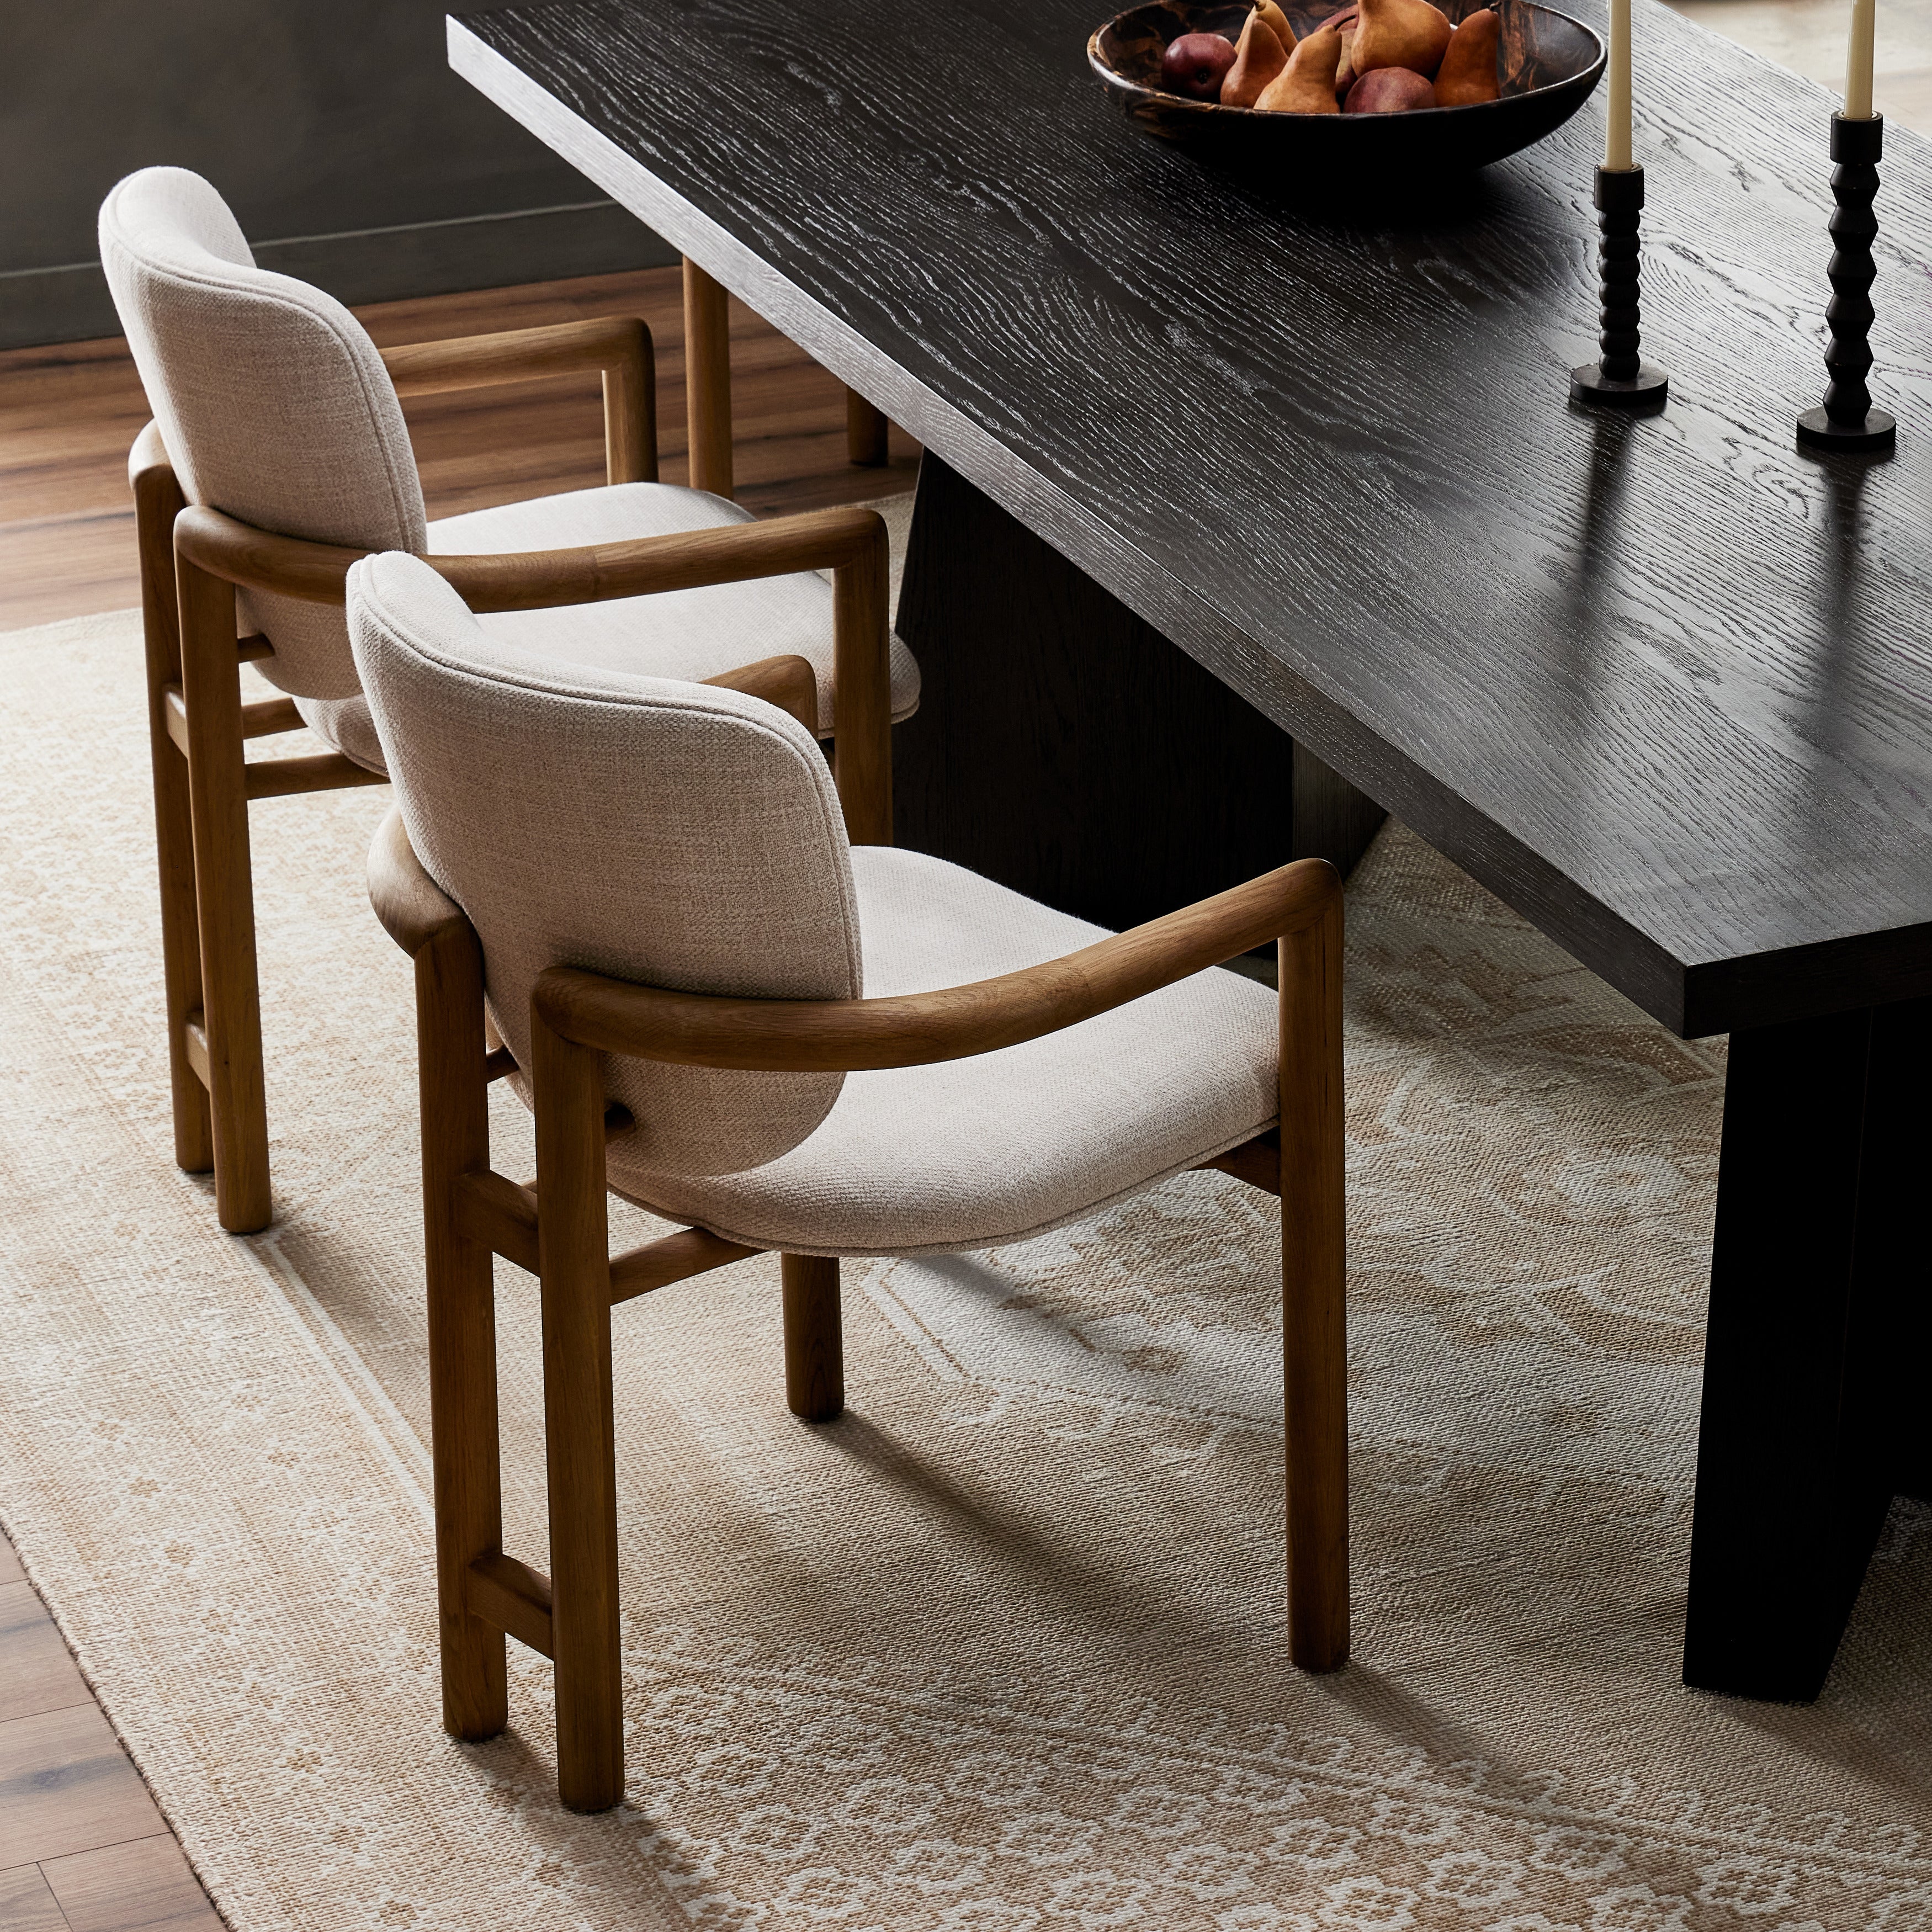 A three-leg format dining chair, streamlining a traditional shape with a touch of intrigue. Tubular framework pairs with curves and a barrel back, bringing a softness to the overall look and design. Amethyst Home provides interior design, new construction, custom furniture, and area rugs in the Winter Garden metro area.